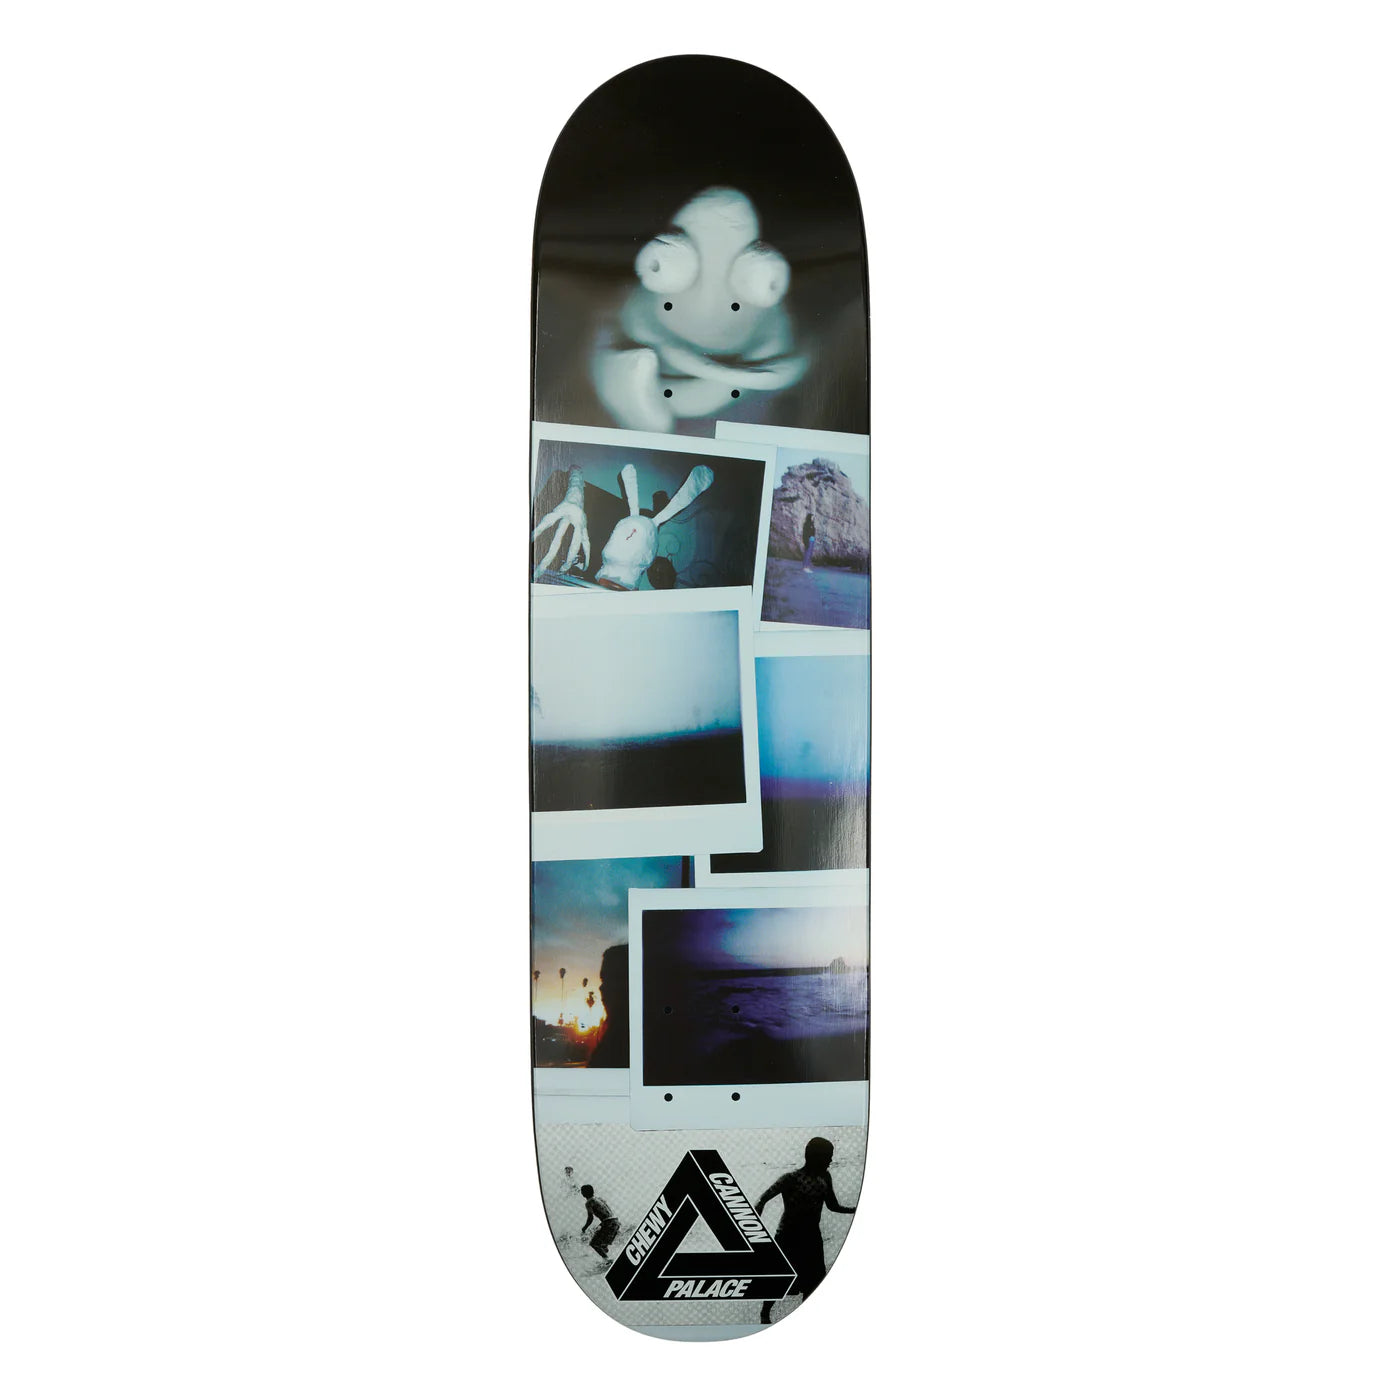 Palace - Chewy Pro S35 Deck - 8.375"